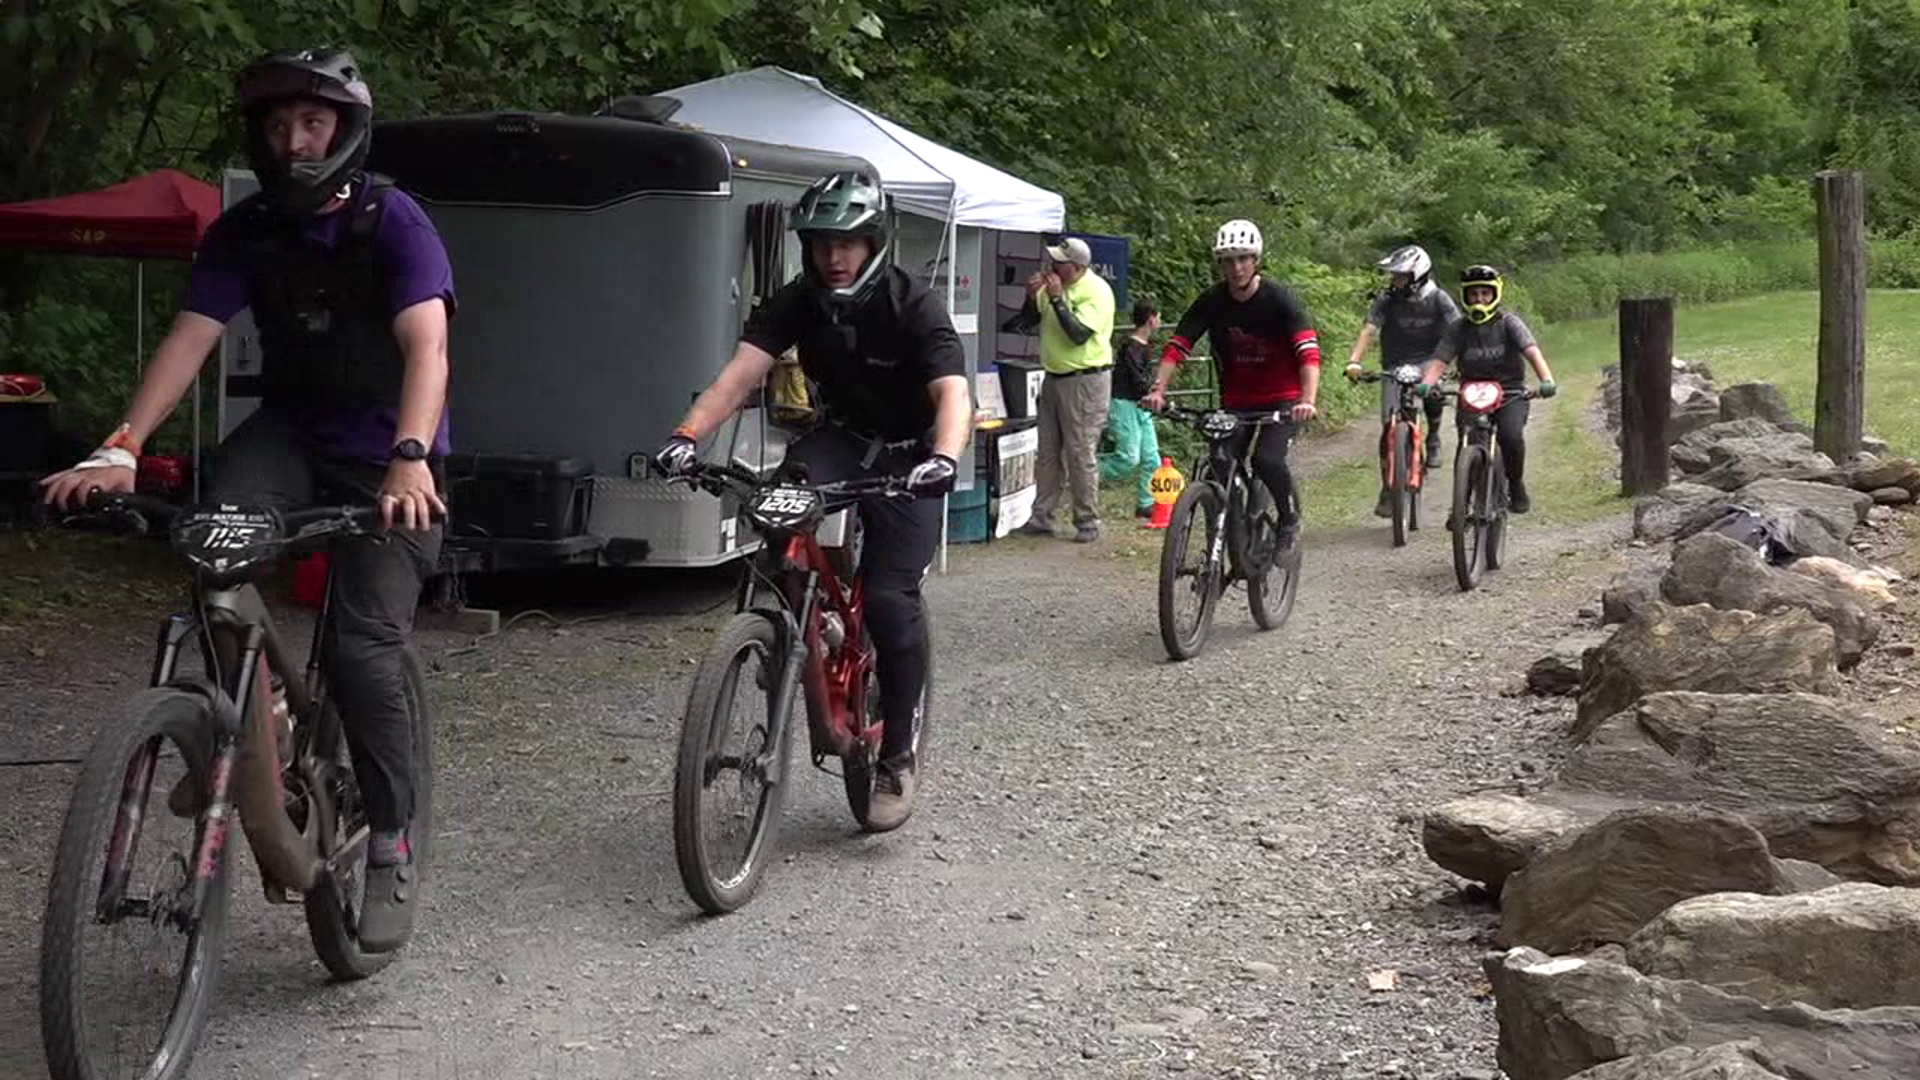 A bike race that has drawn more than 300 cyclists to Monroe County for the last 10 years could be coming to an end.